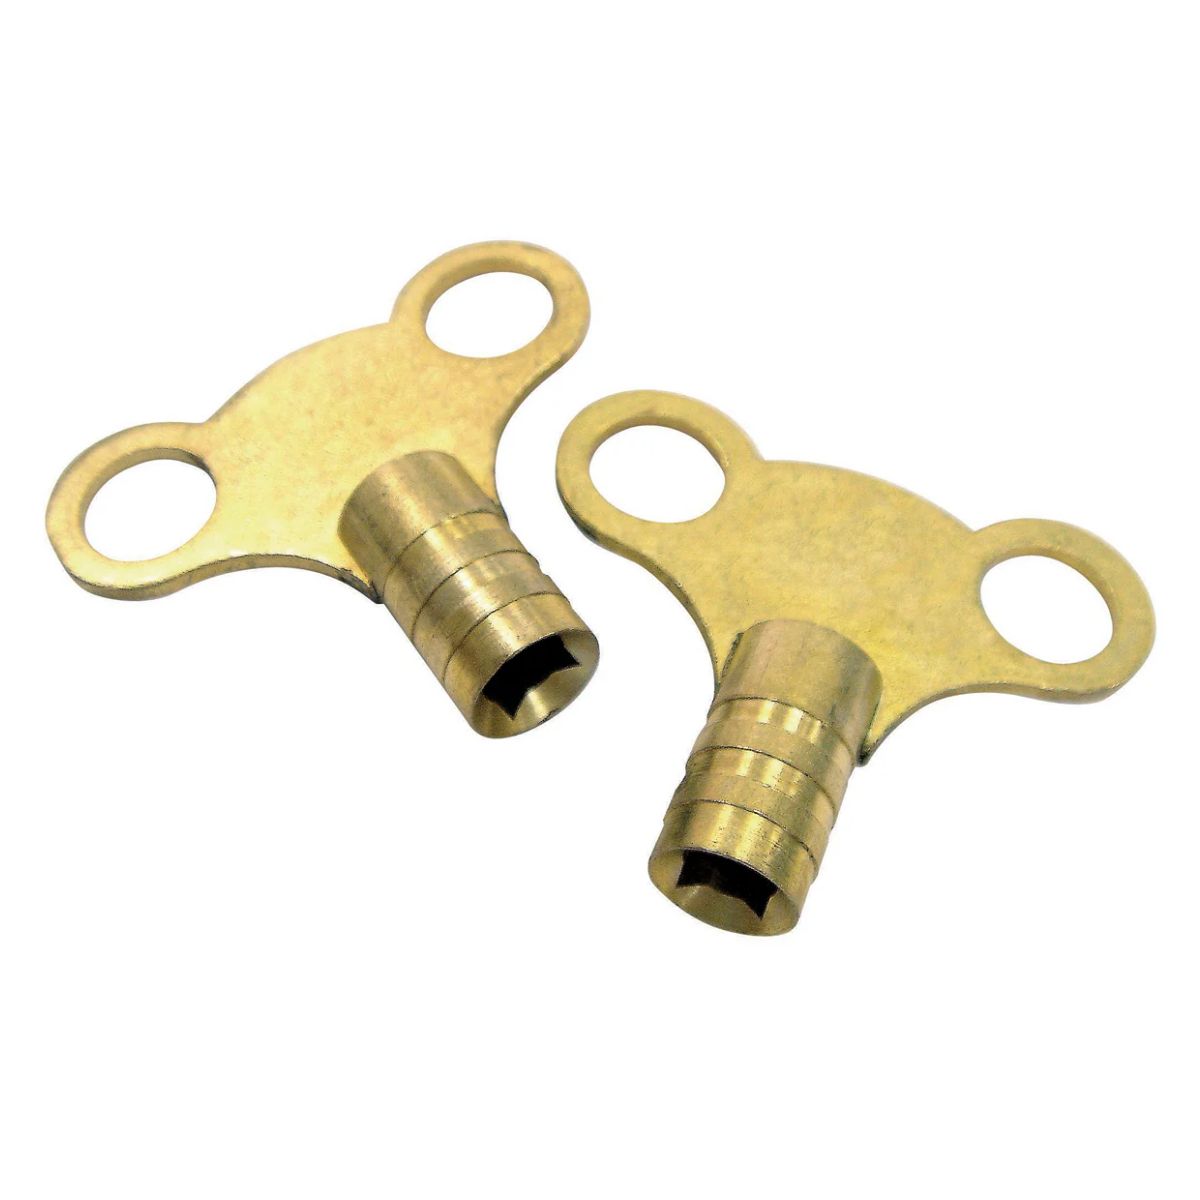 Two Star Pack - Radiator Key T-Bar Solid Brass with square sockets.